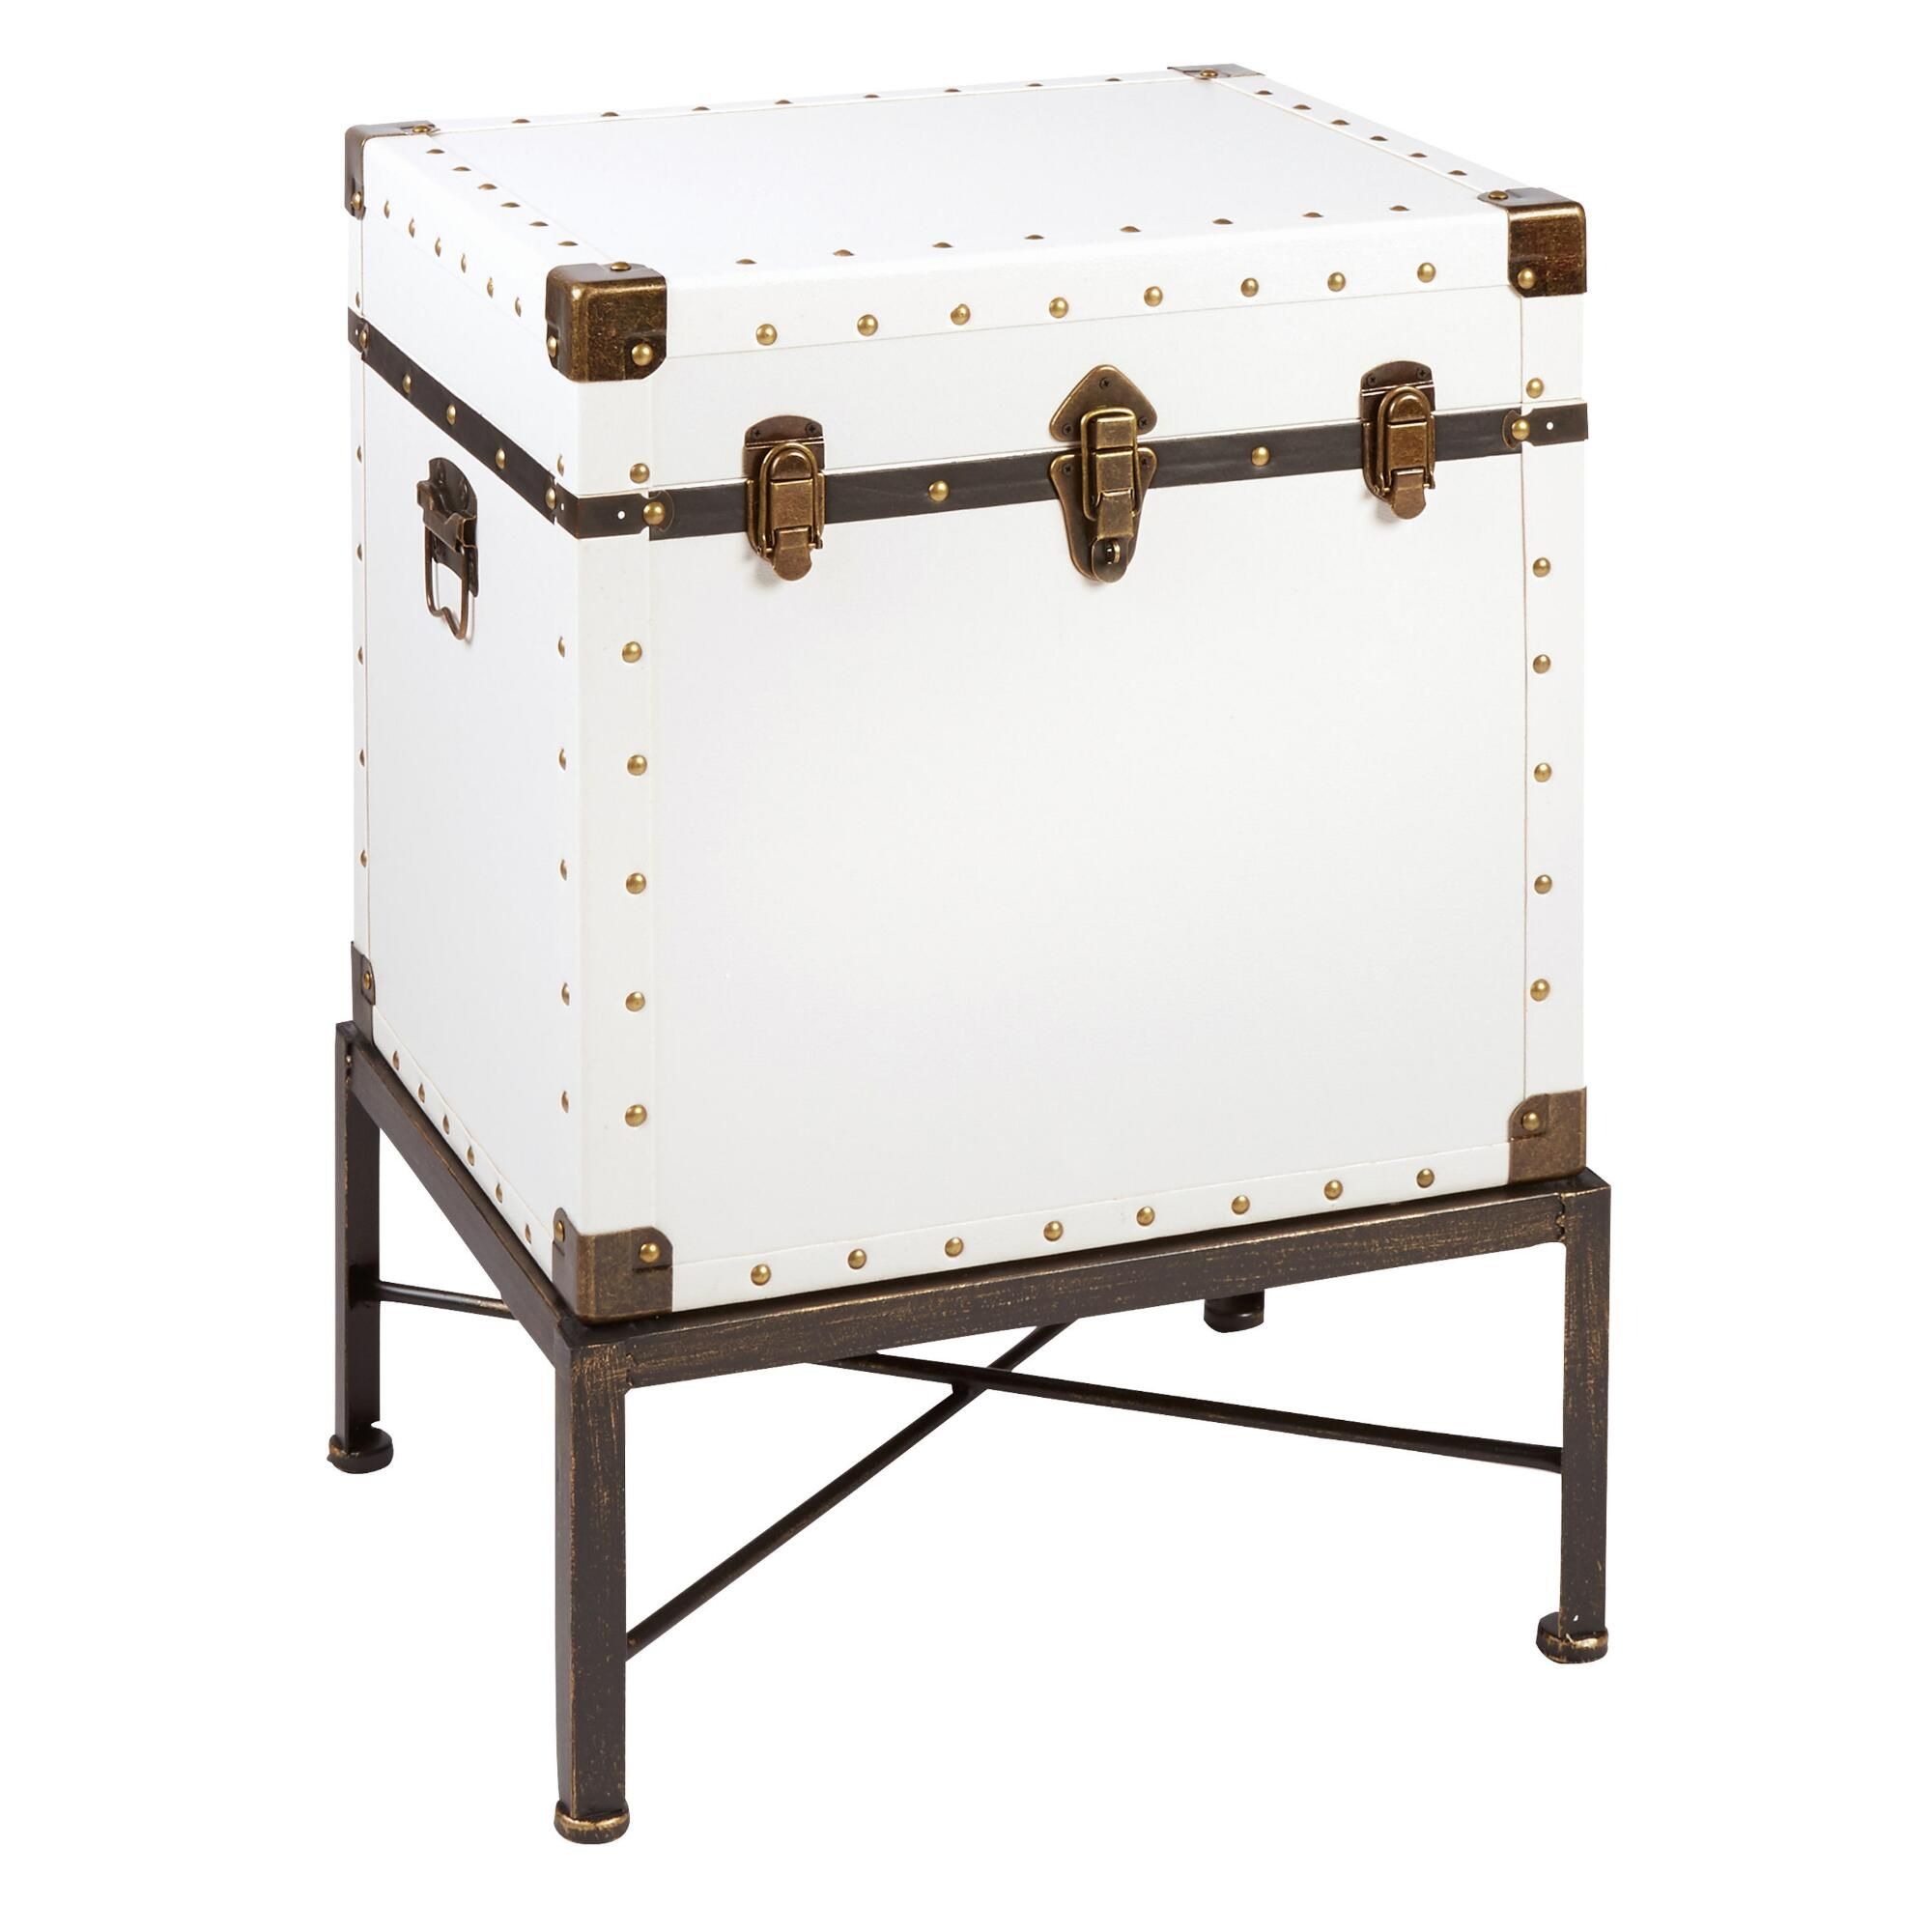 storage always your side with our edgy accent table this nailheads spacious trunk features metal and traditional closures keep items handy ashley furniture end tables elemental